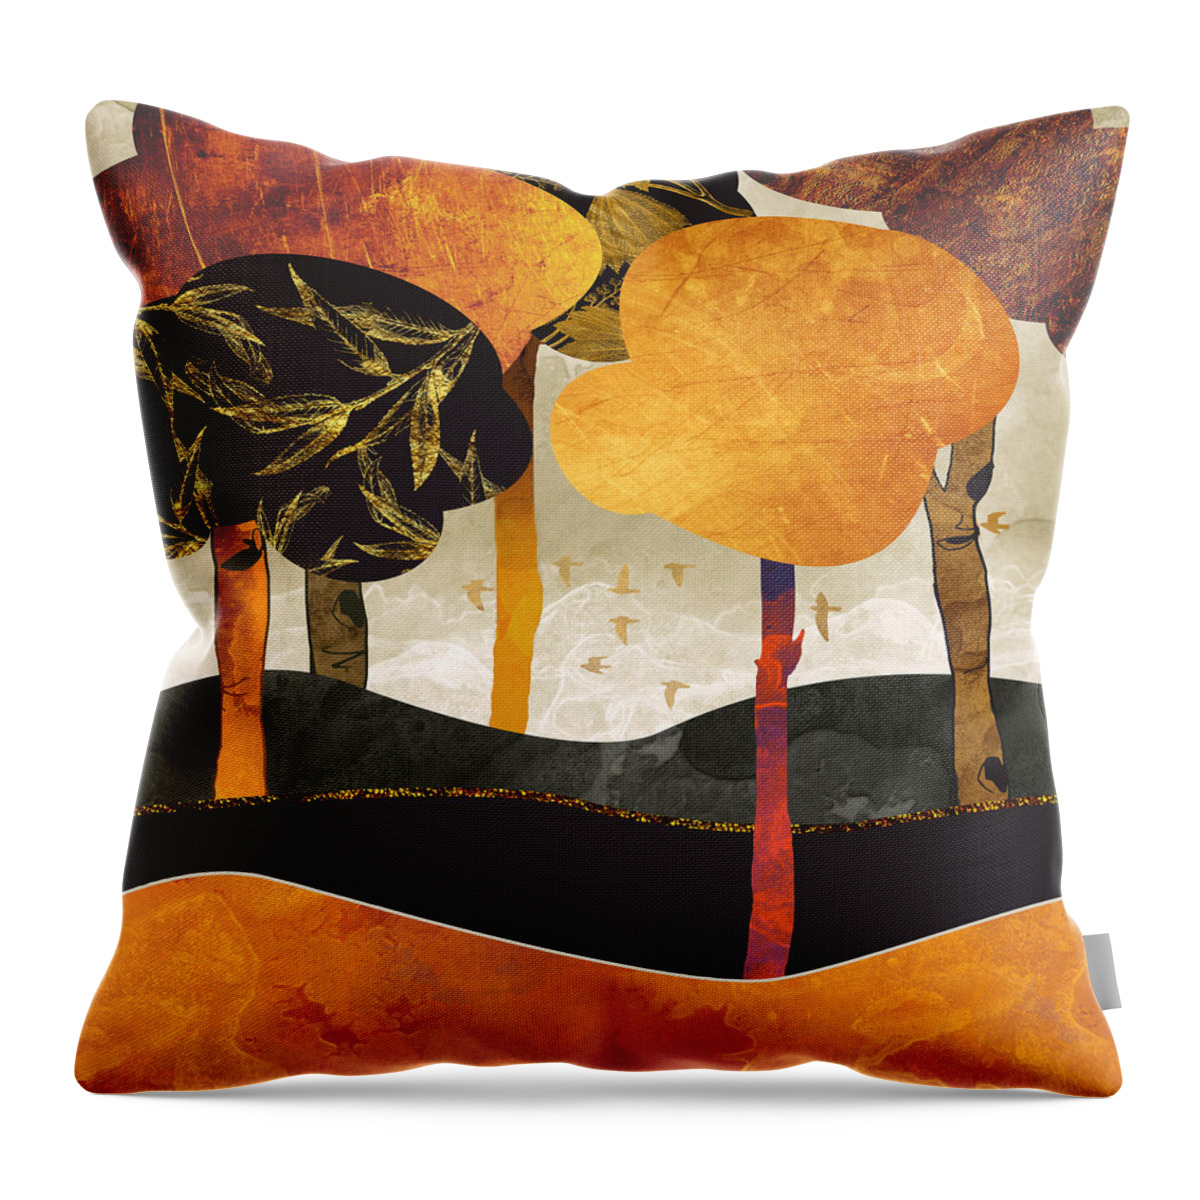 Metallic Throw Pillow featuring the digital art Metallic Forest by Spacefrog Designs